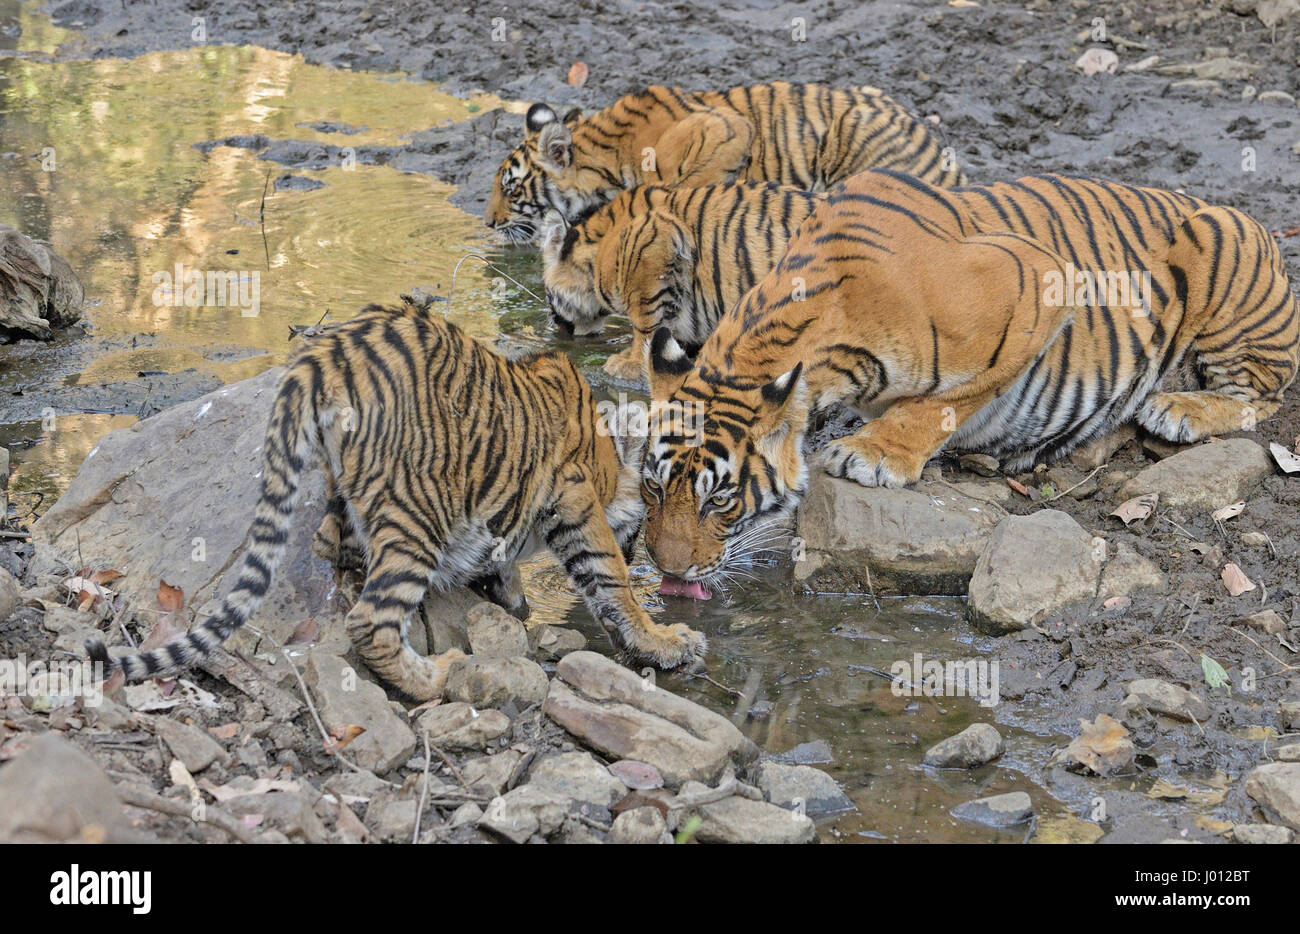 A wild tigress with her young cubs drinking water from a small pond in Ranthambhore national park of India Stock Photo